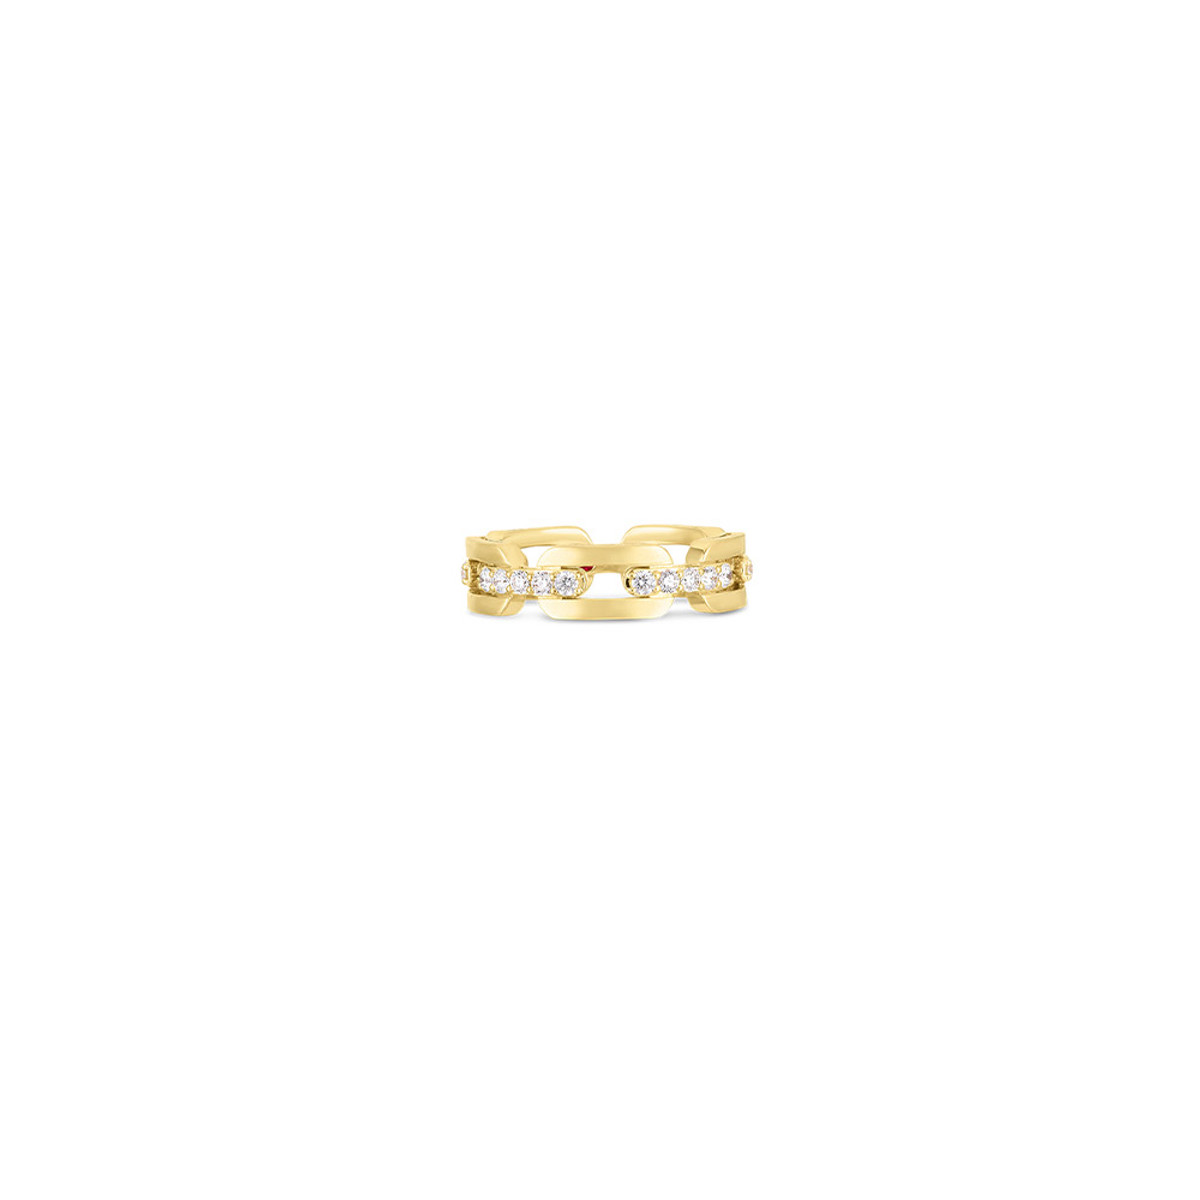 Roberto Coin 18K Yellow Gold Navarra Hard Chain Link Ring-39937 Product Image